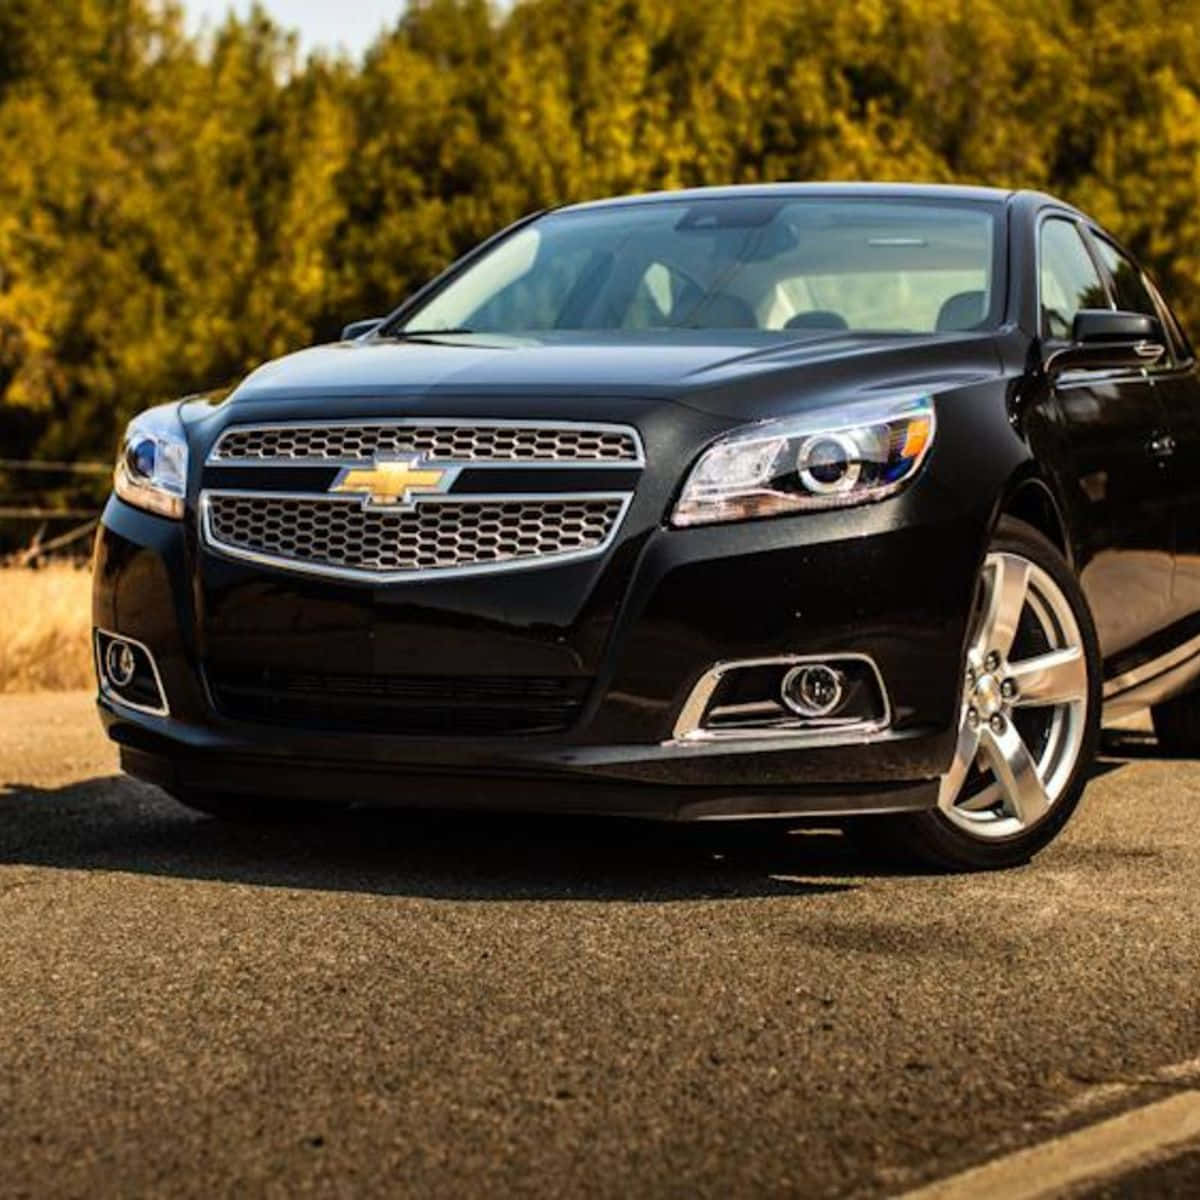 The Black Chevrolet Malibu Is Parked On The Road Wallpaper